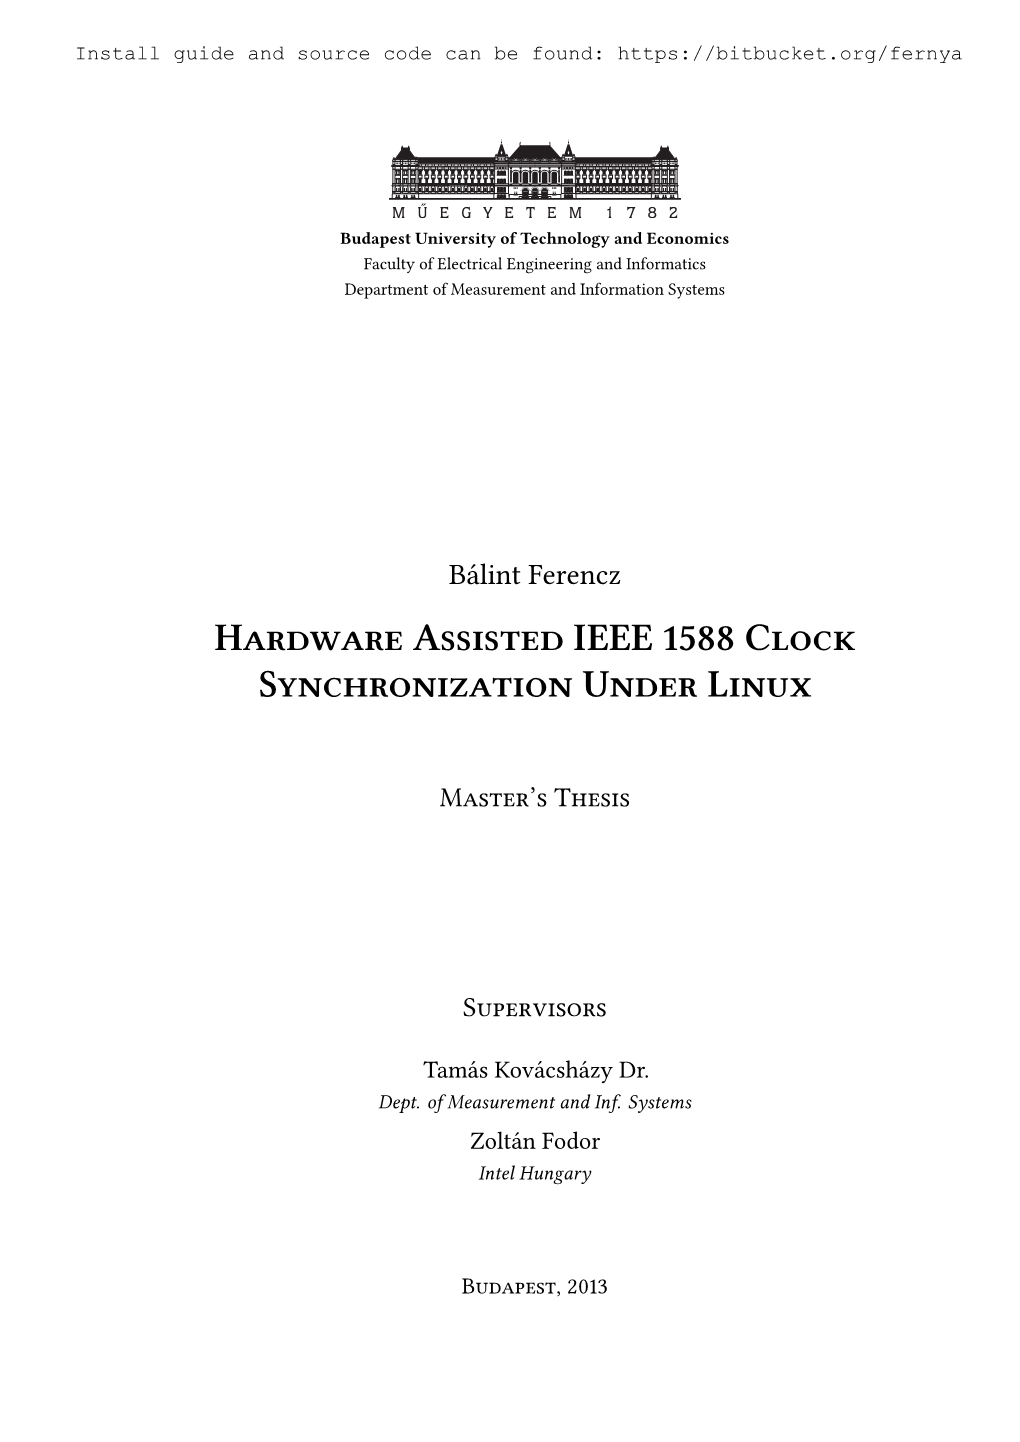 Hardware Assisted IEEE 1588 Clock Synchronization Under Linux